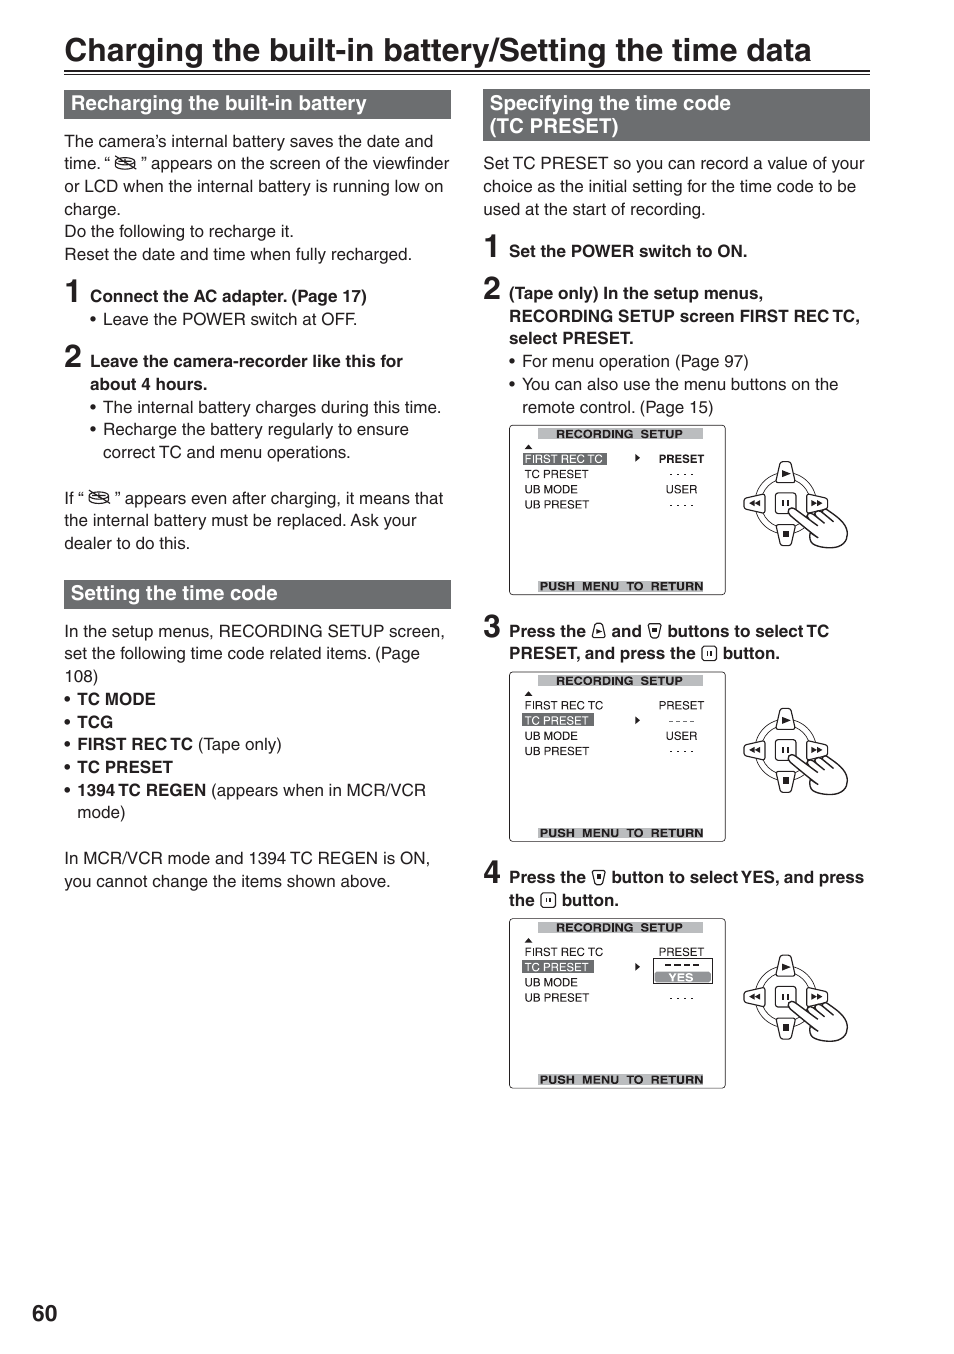 Recharging the built-in battery, Setting the time code, Specifying the time code (tc preset) | Panasonic AG-HVX200 User Manual | Page 60 / 138